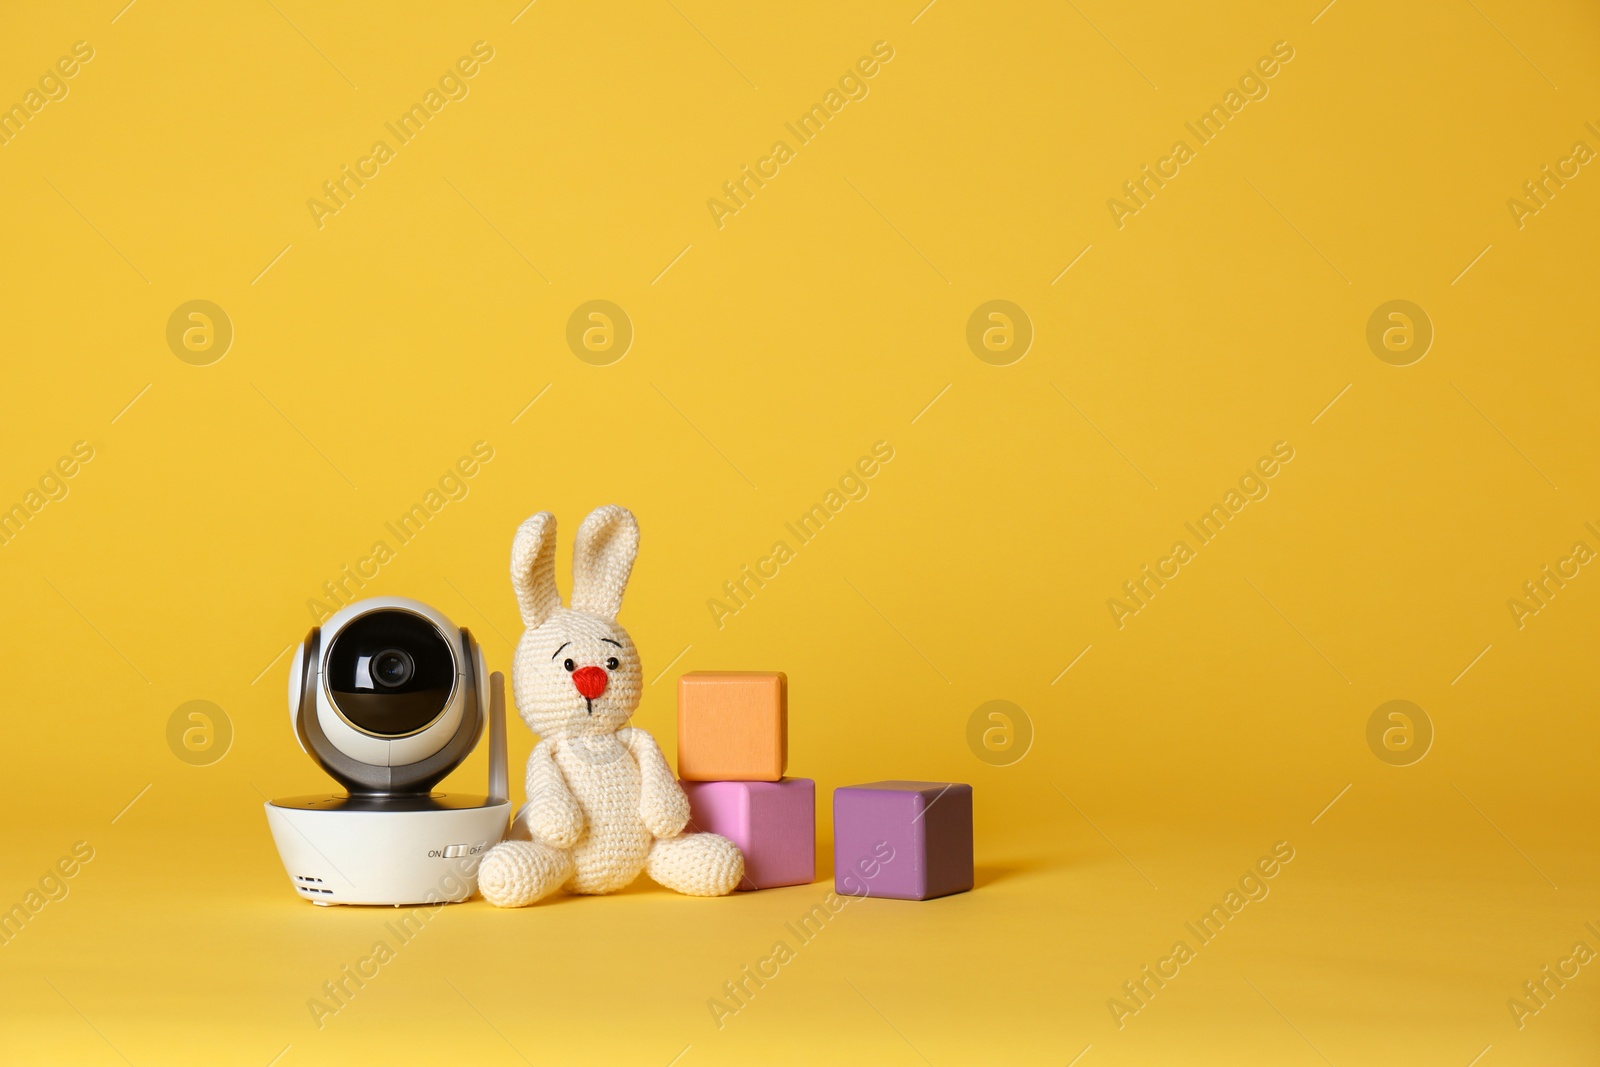 Photo of Modern CCTV security camera, toy bunny and cubes on color background. Space for text